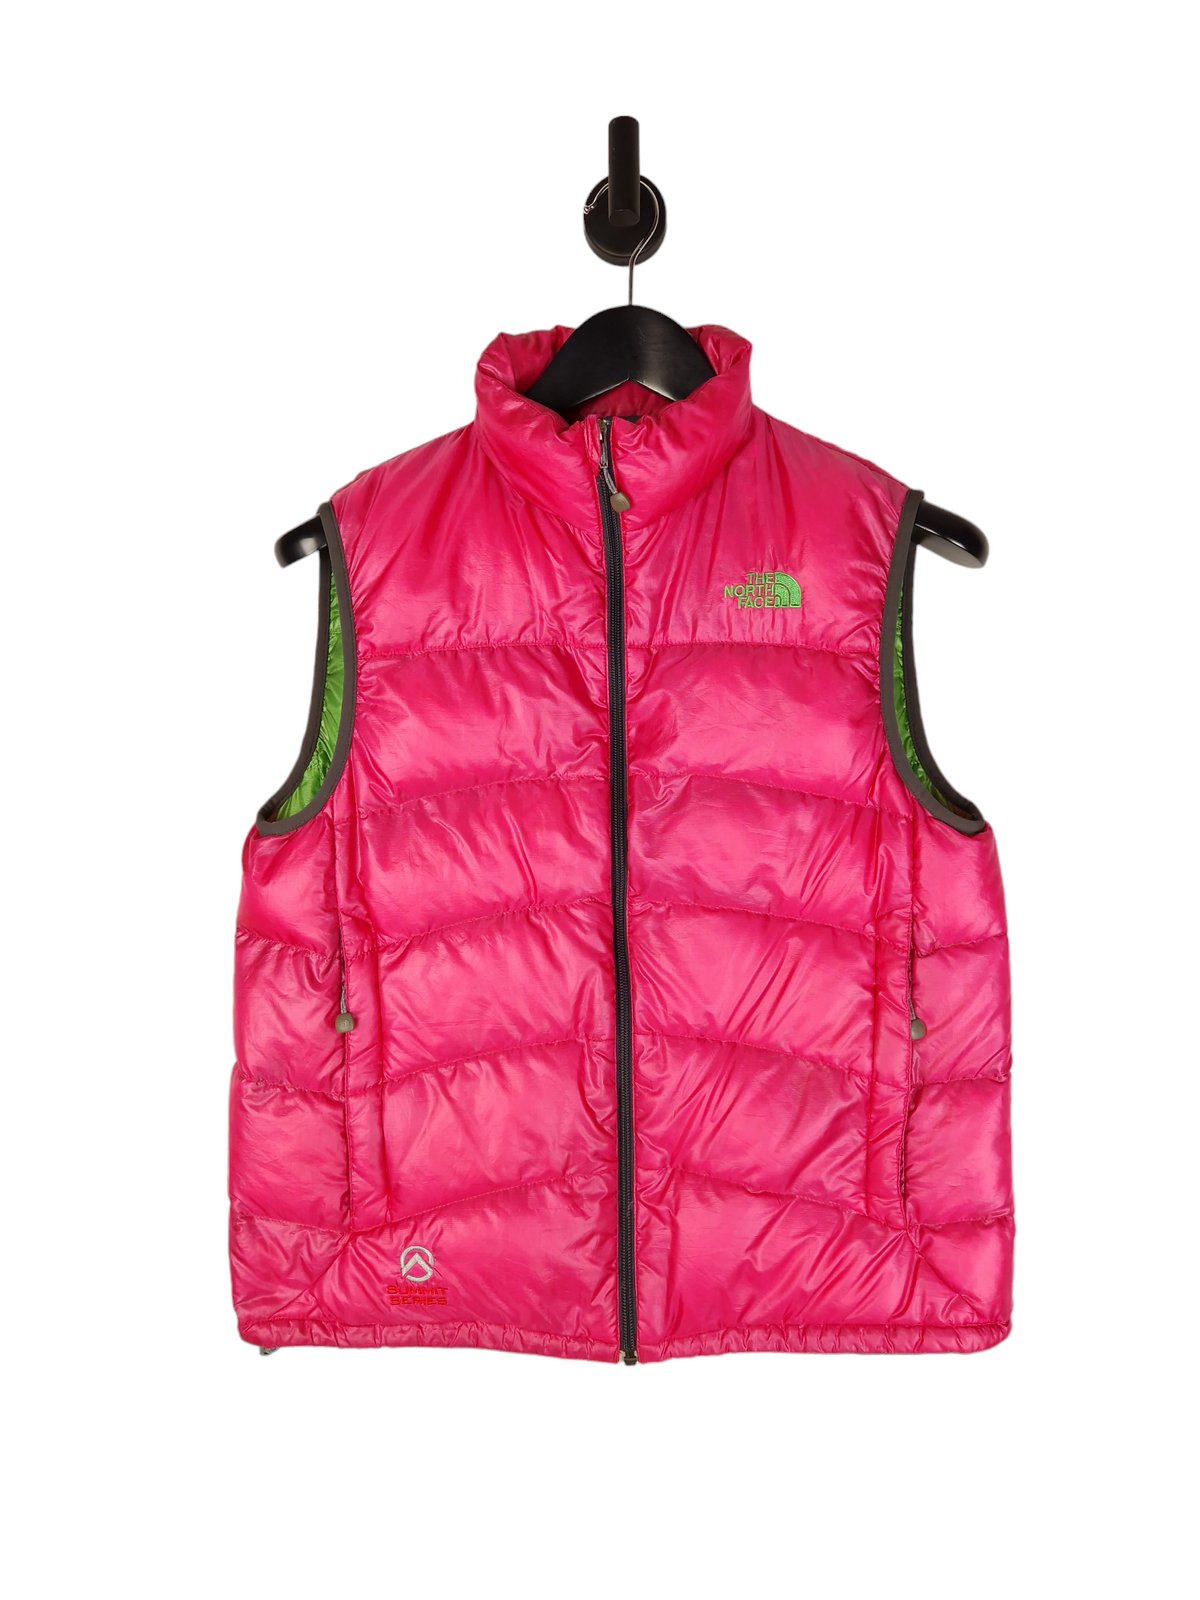 The North Face Summit Series Gilet Puffer Jacket - Size  UK 10